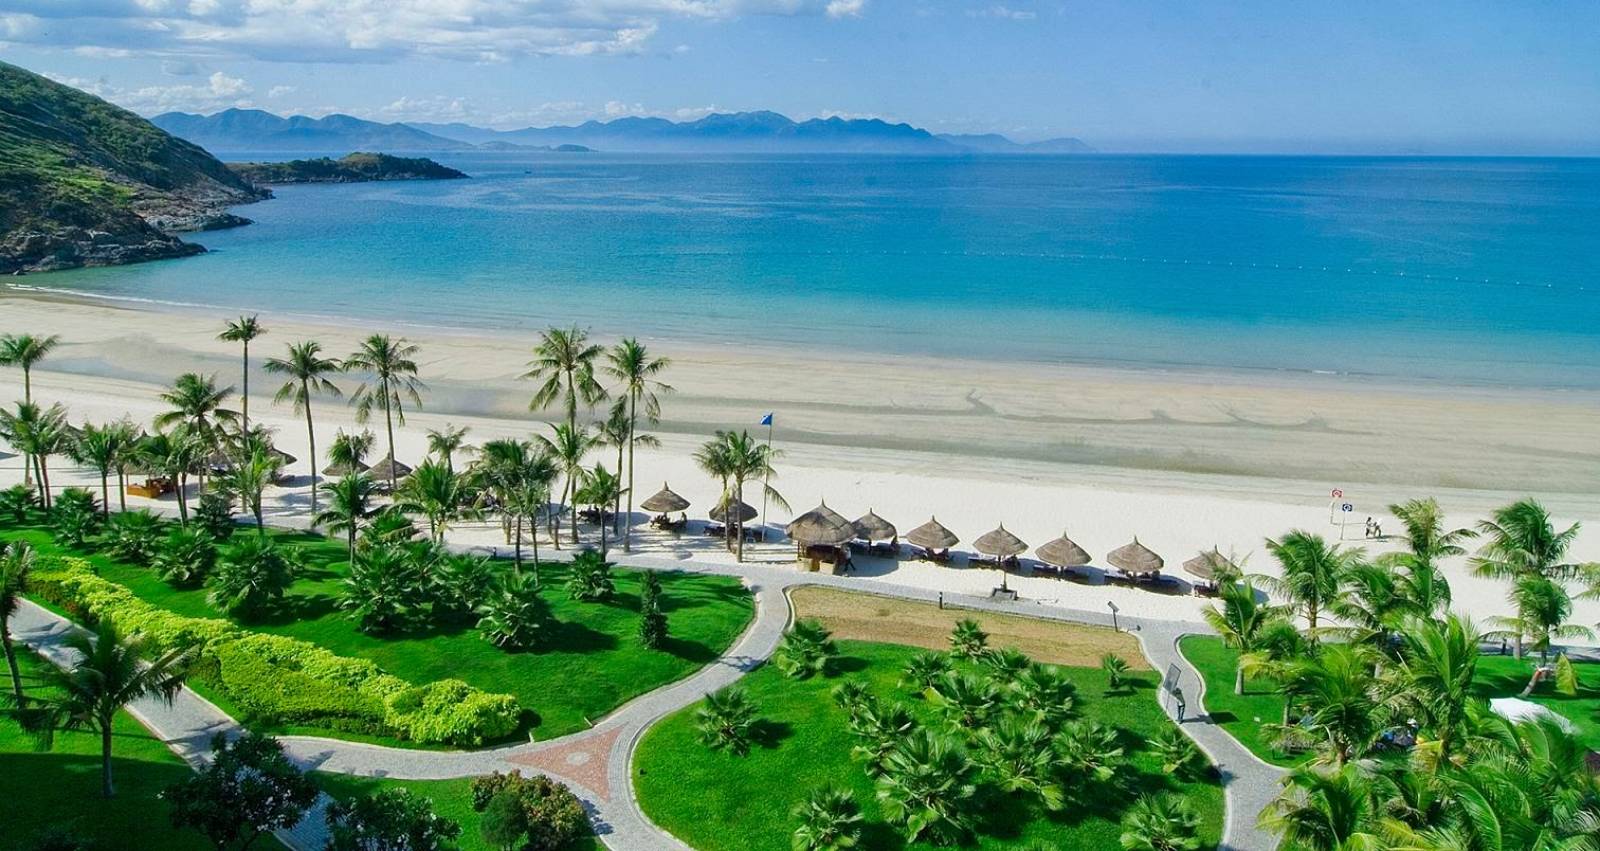 The best Nha Trang Tours